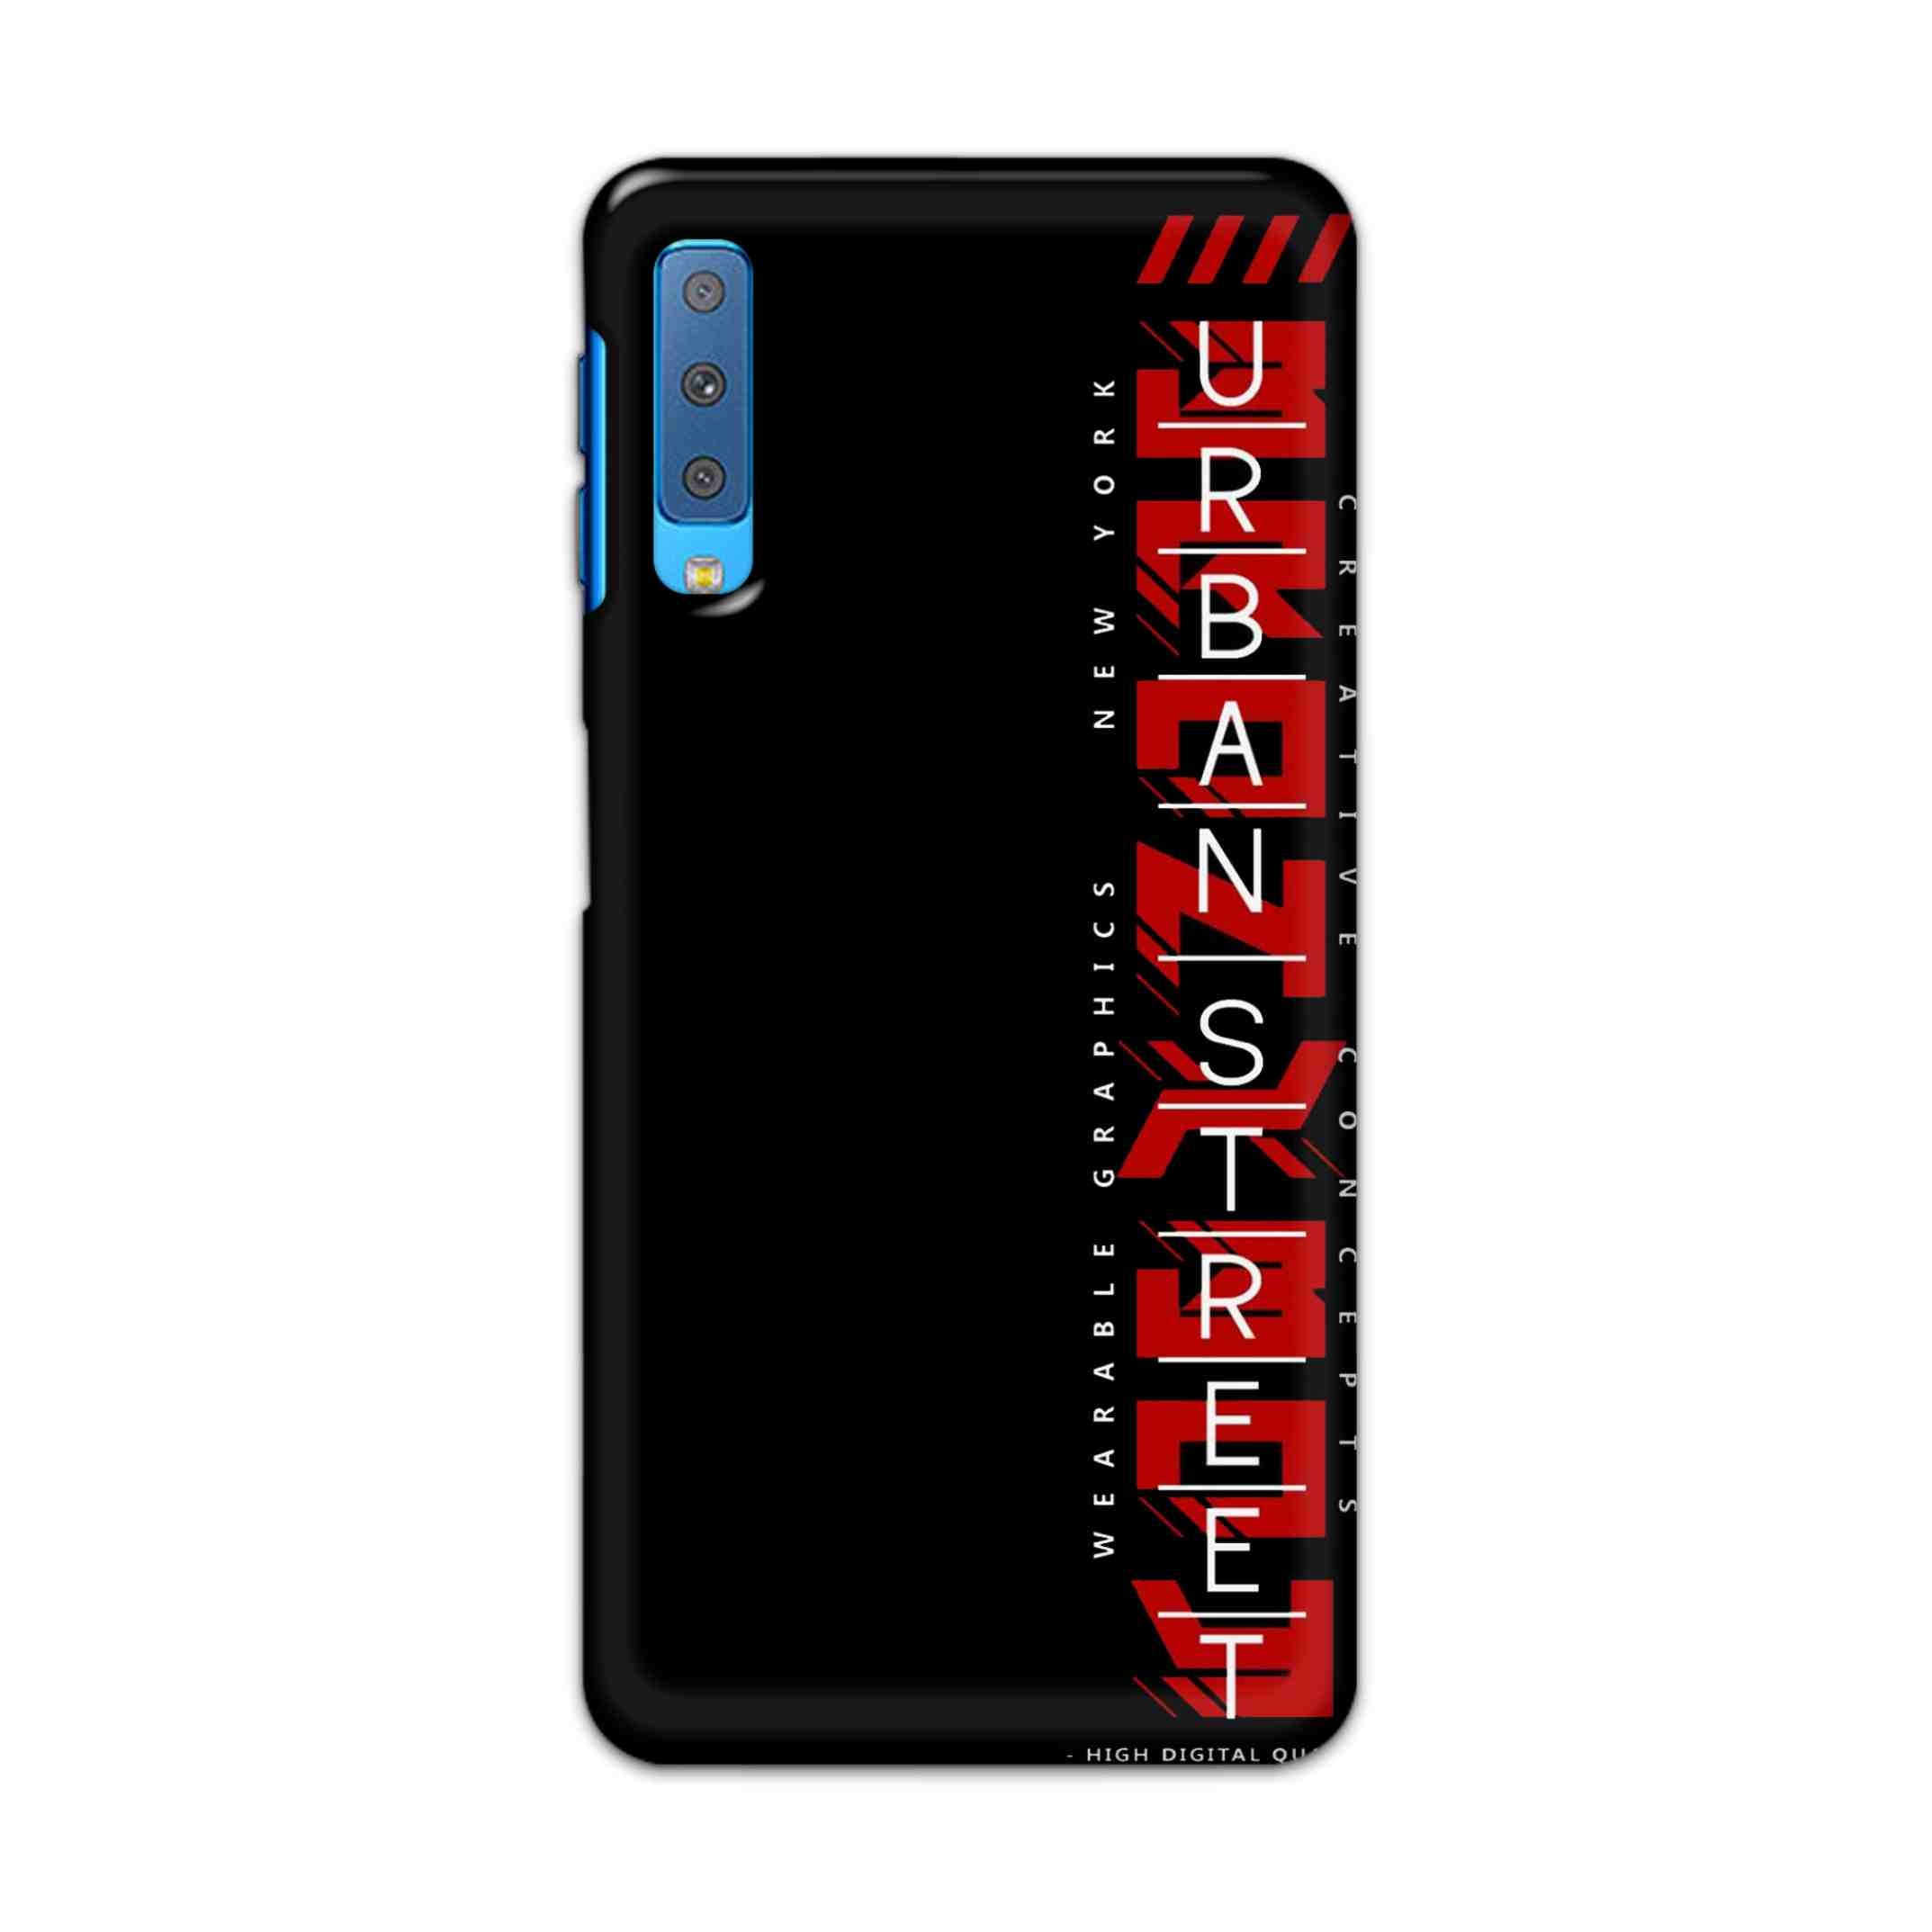 Buy Urban Street Hard Back Mobile Phone Case Cover For Samsung Galaxy A7 2018 Online